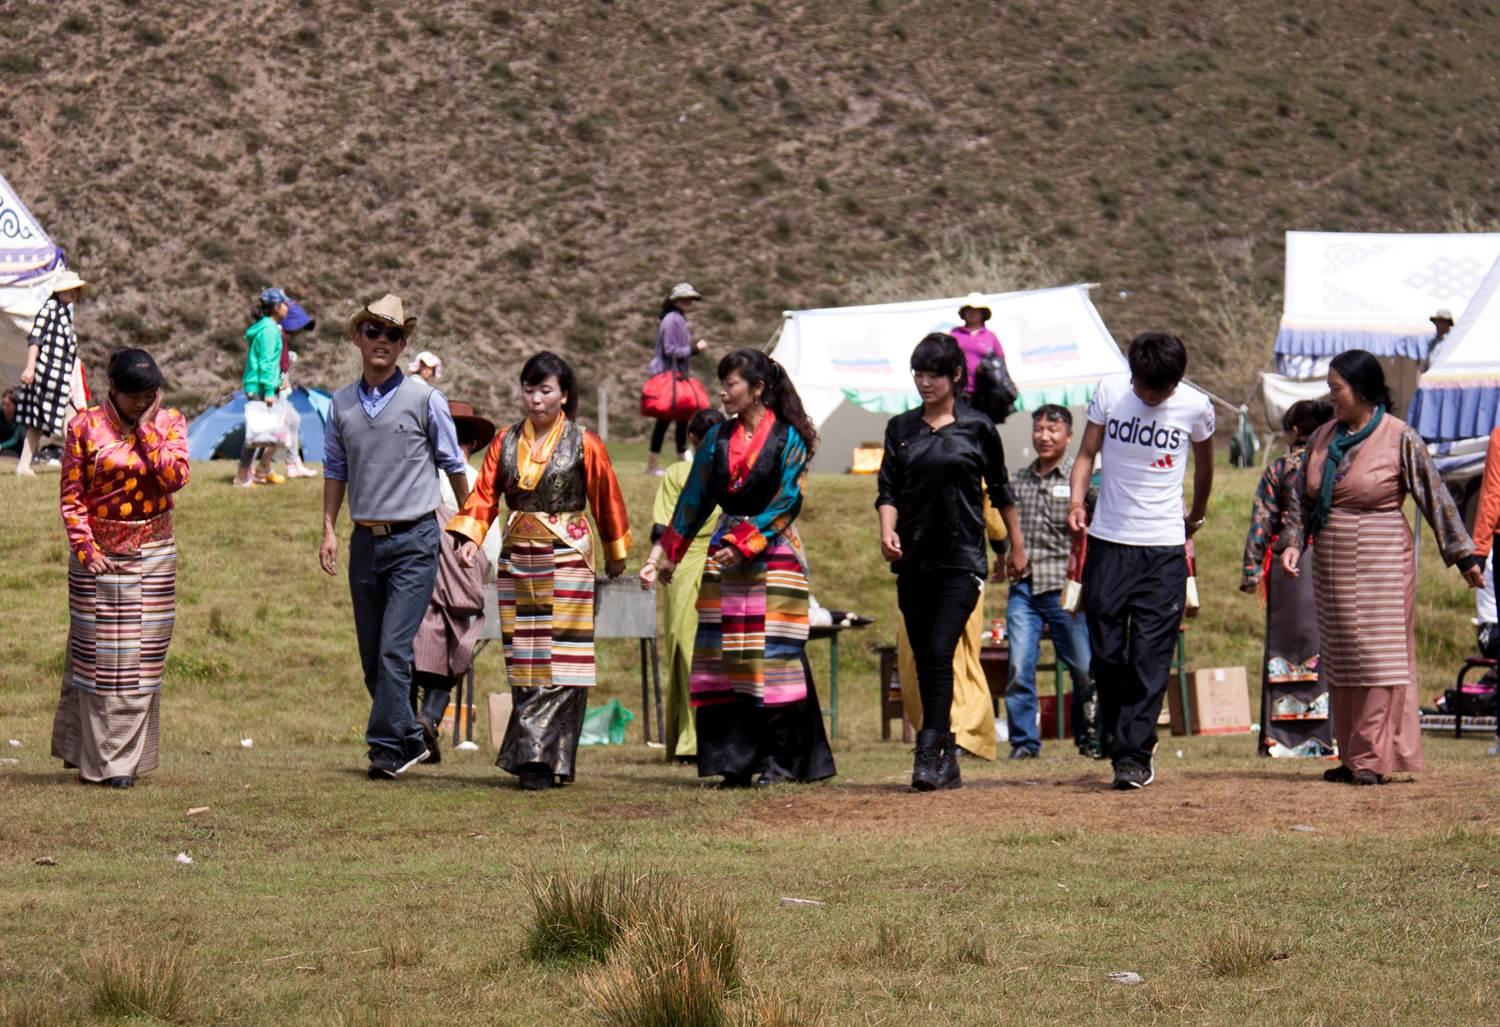 Dancing and Singing are no doubt the most popular activities in Tibetan